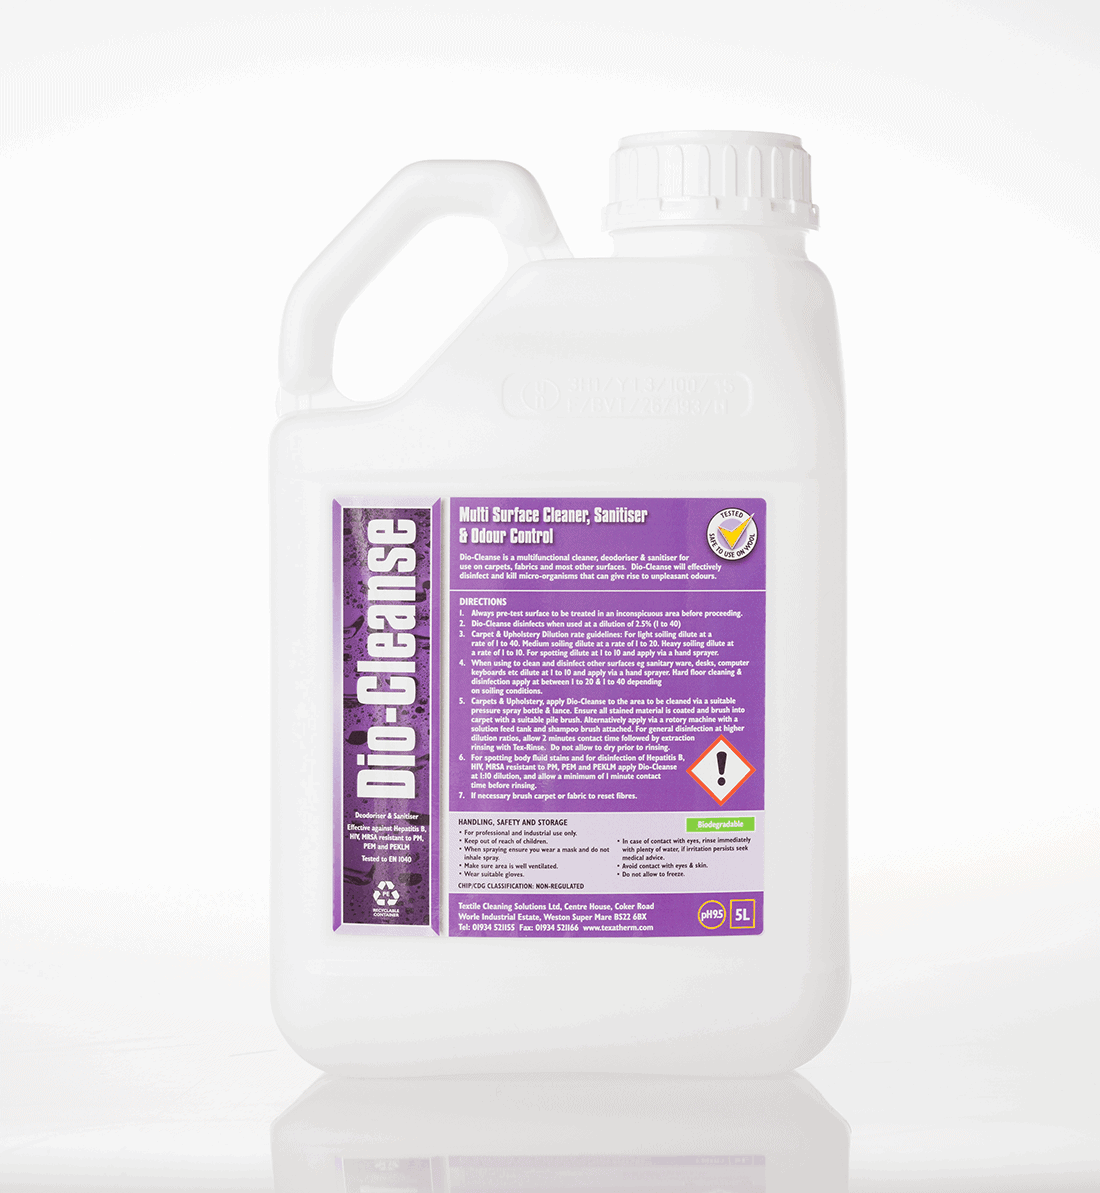 Biocidal, anti Viral Carpet, upholstery and surface disinfectant